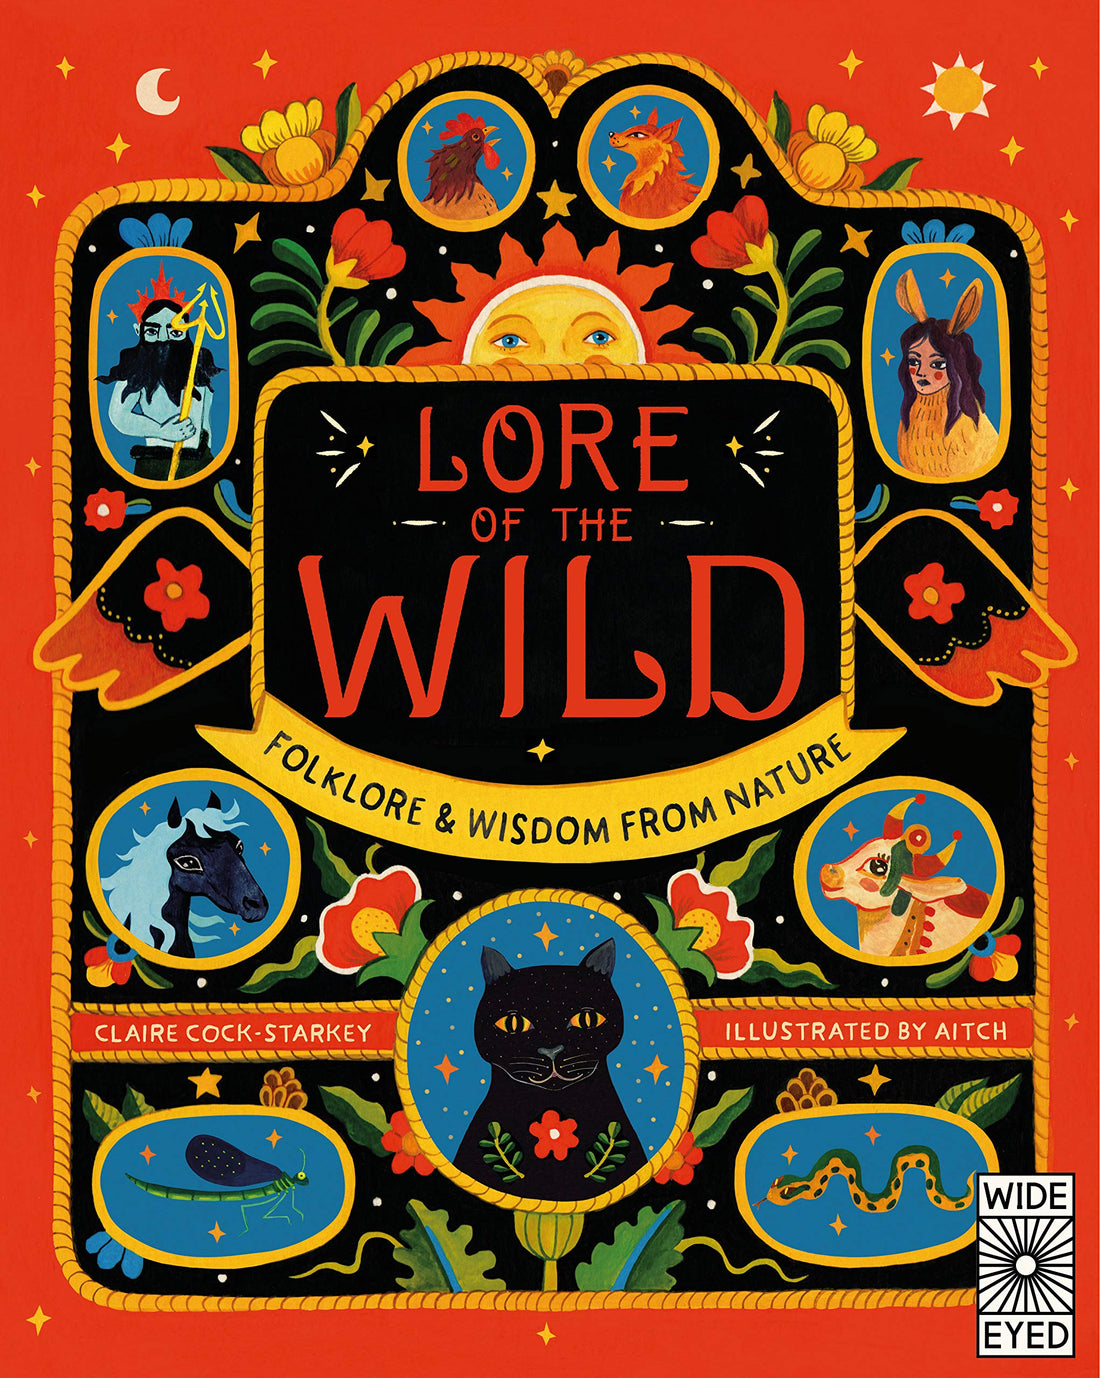 Lore of the Wild: Folklore & Wisdom from Nature - Parkette.